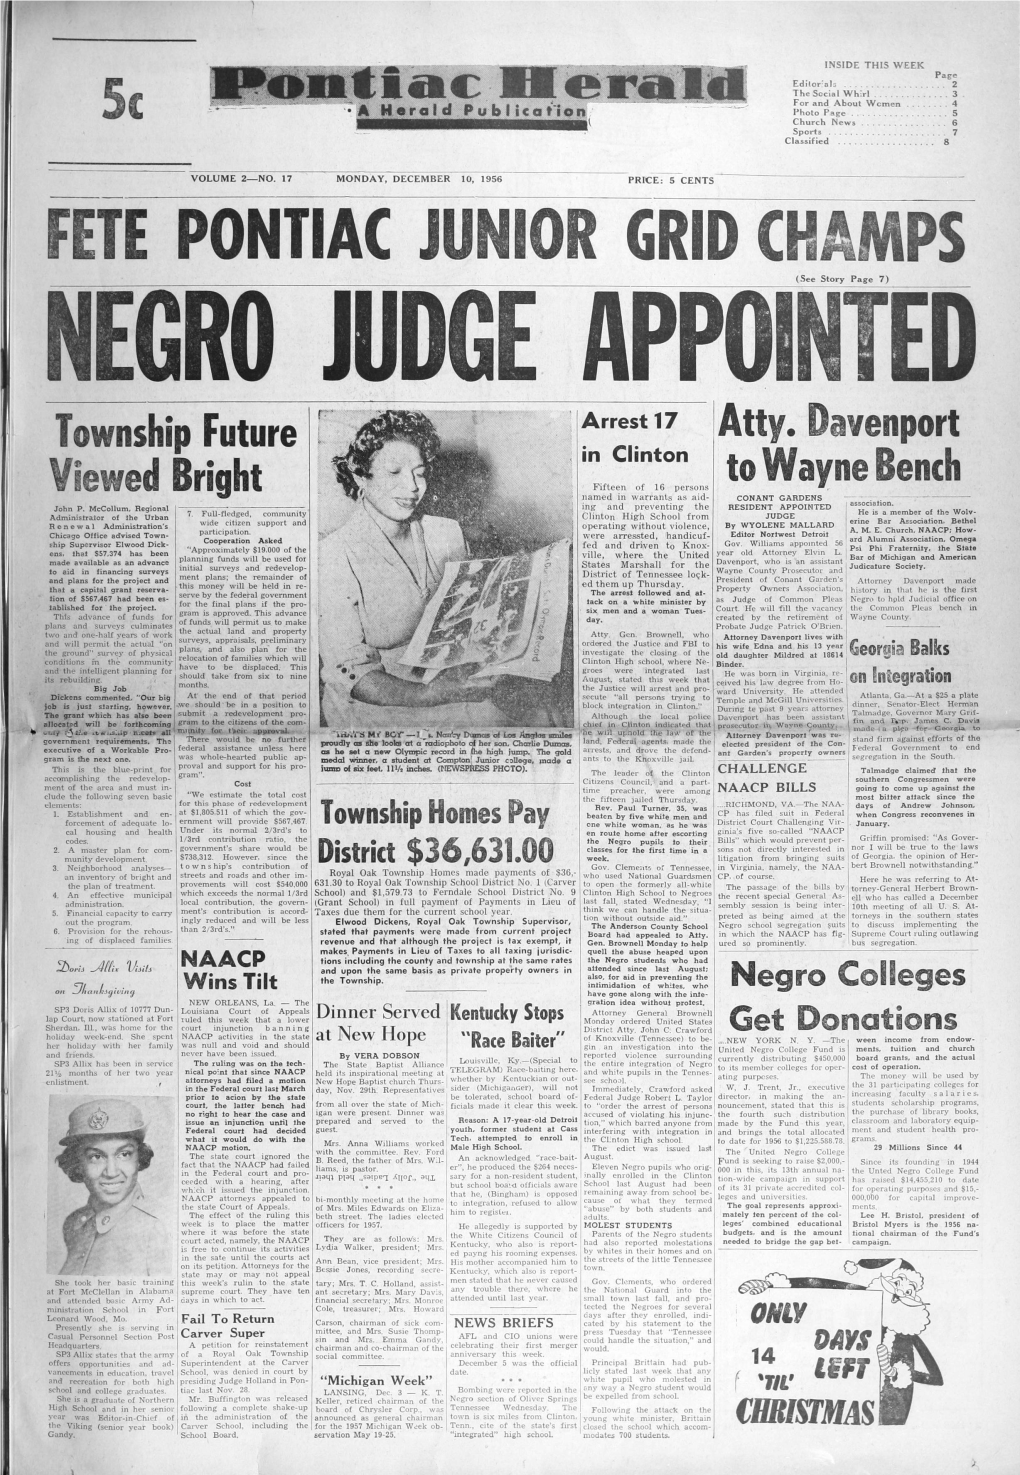 DECEMBER 10, 1956 PRICE: 5 CENTS FETE PONTIAC JUNIOR GRID CHAMPS KGRO JUDGE APPOINTE(See Story Page 7) D Township Future Arrest 17 Atty